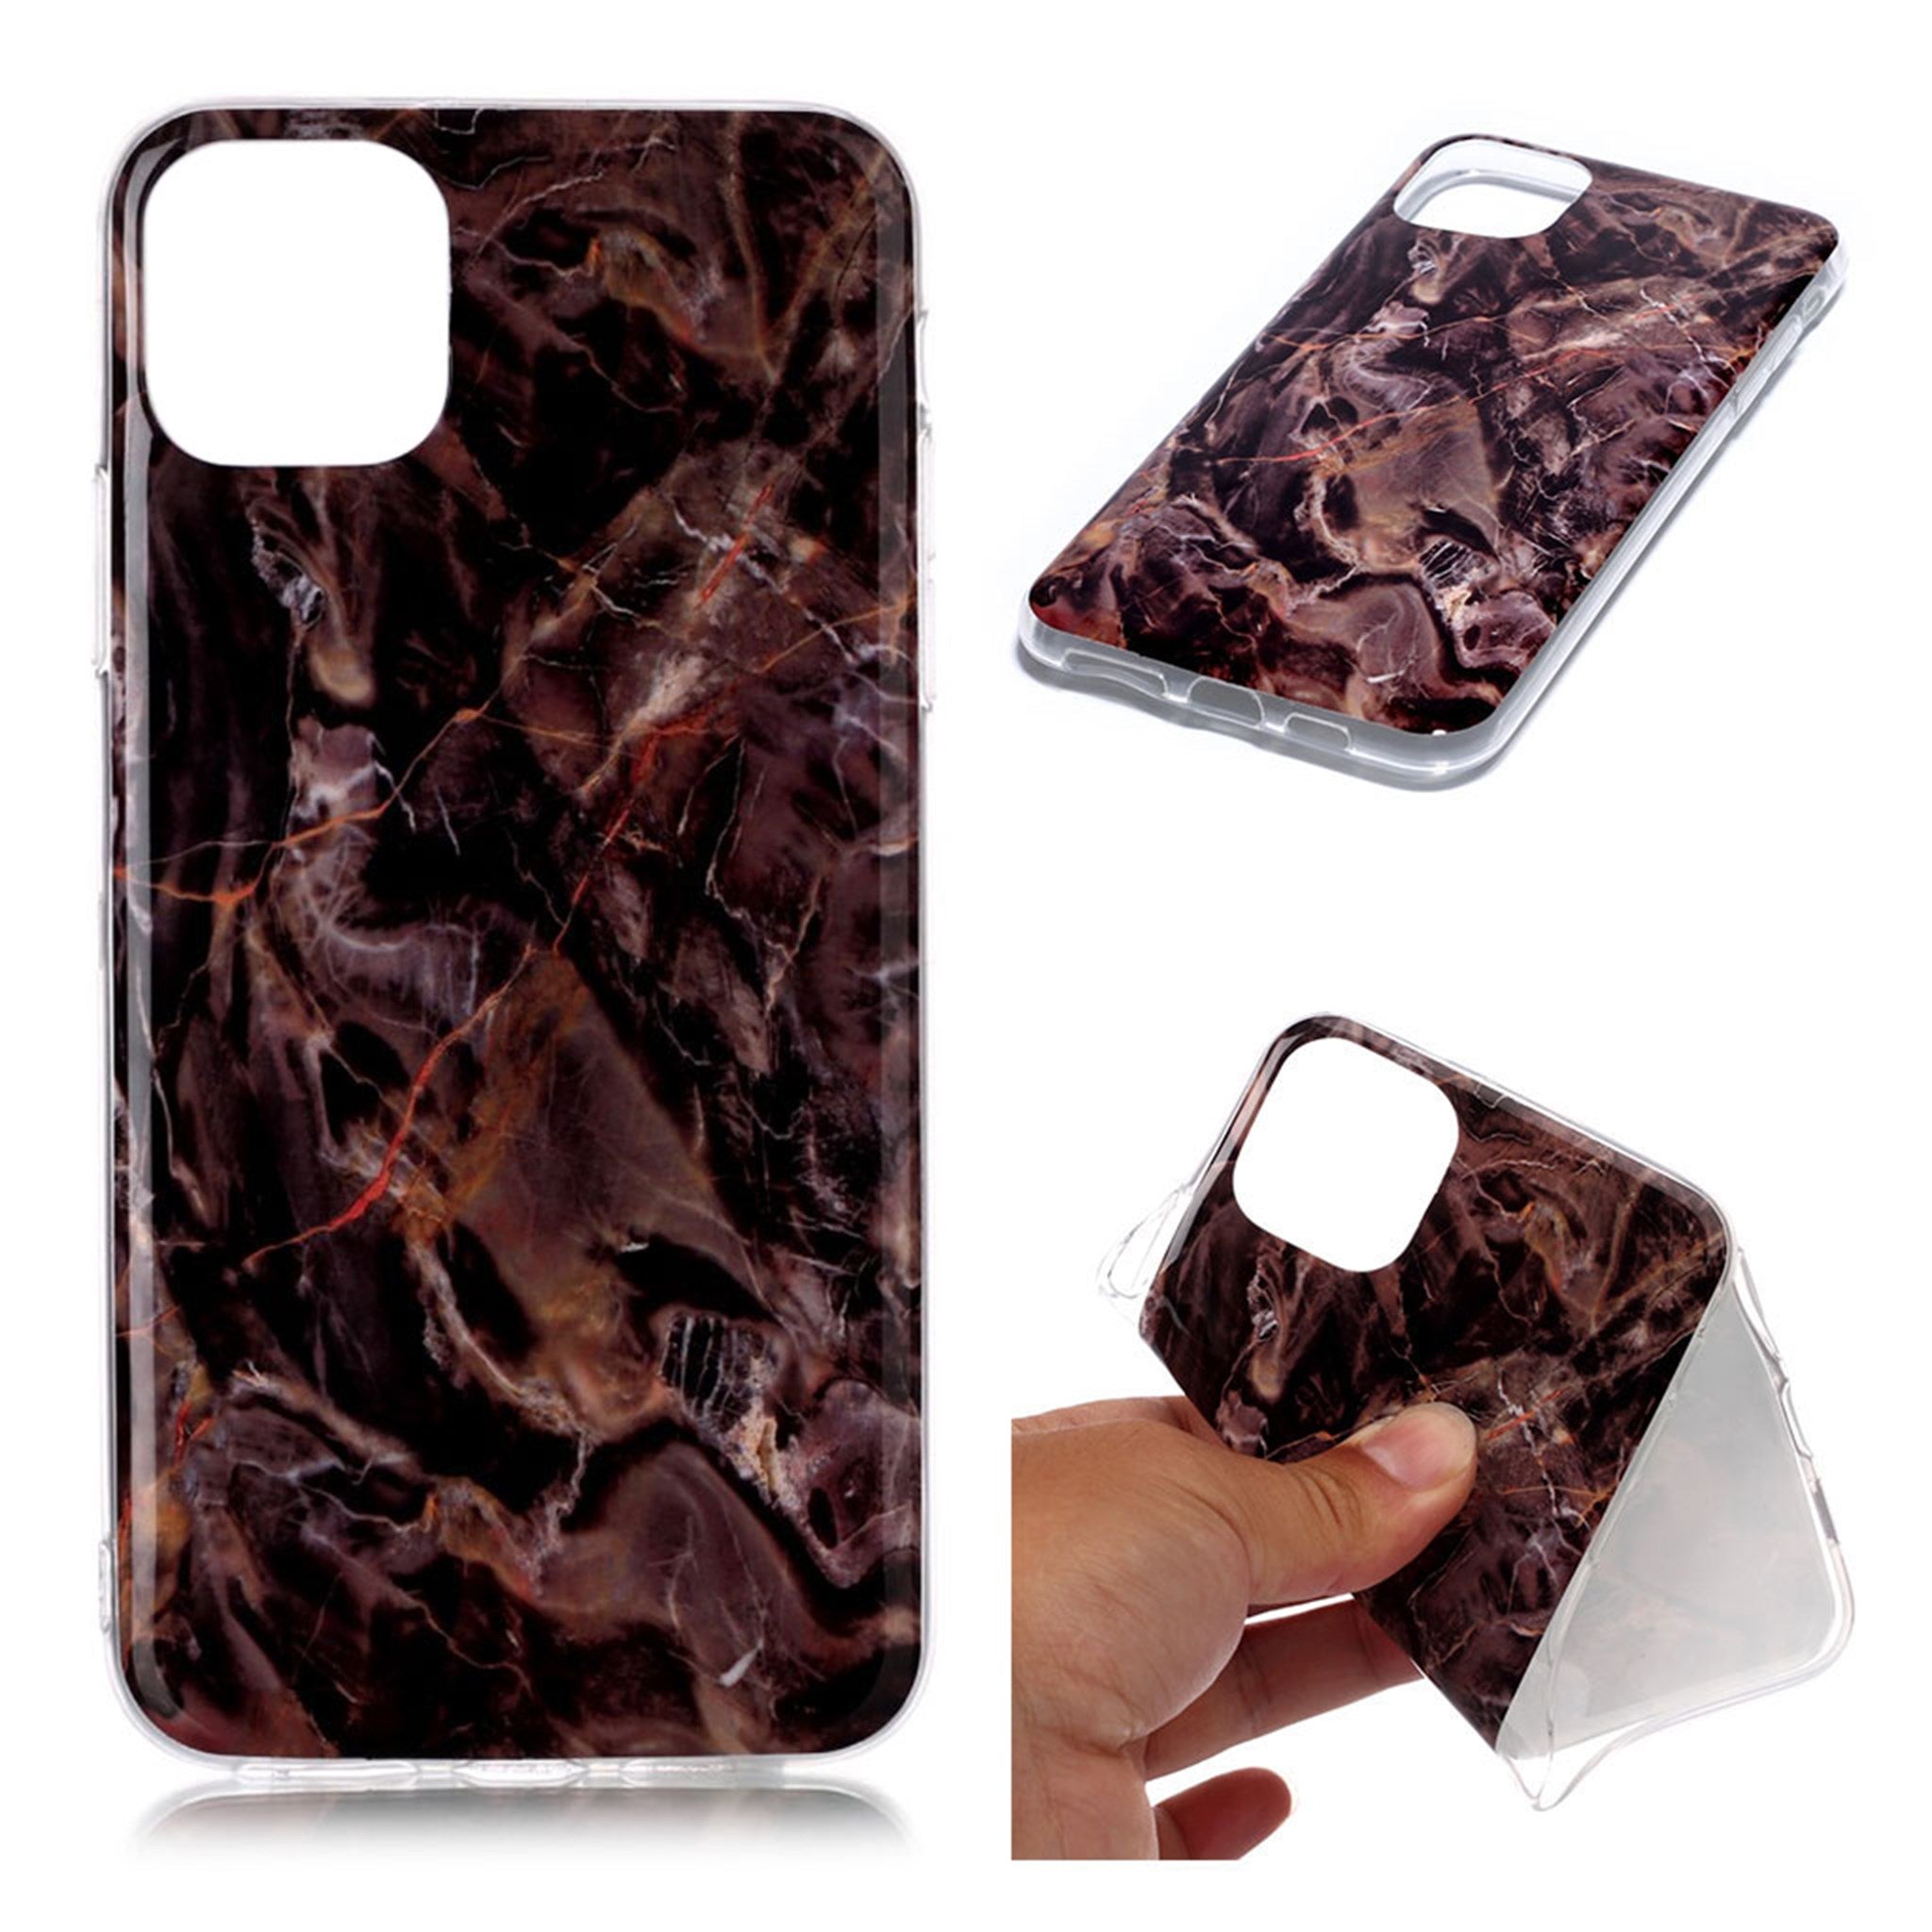 Marble iPhone 11 Pro Max case - Brown Marble